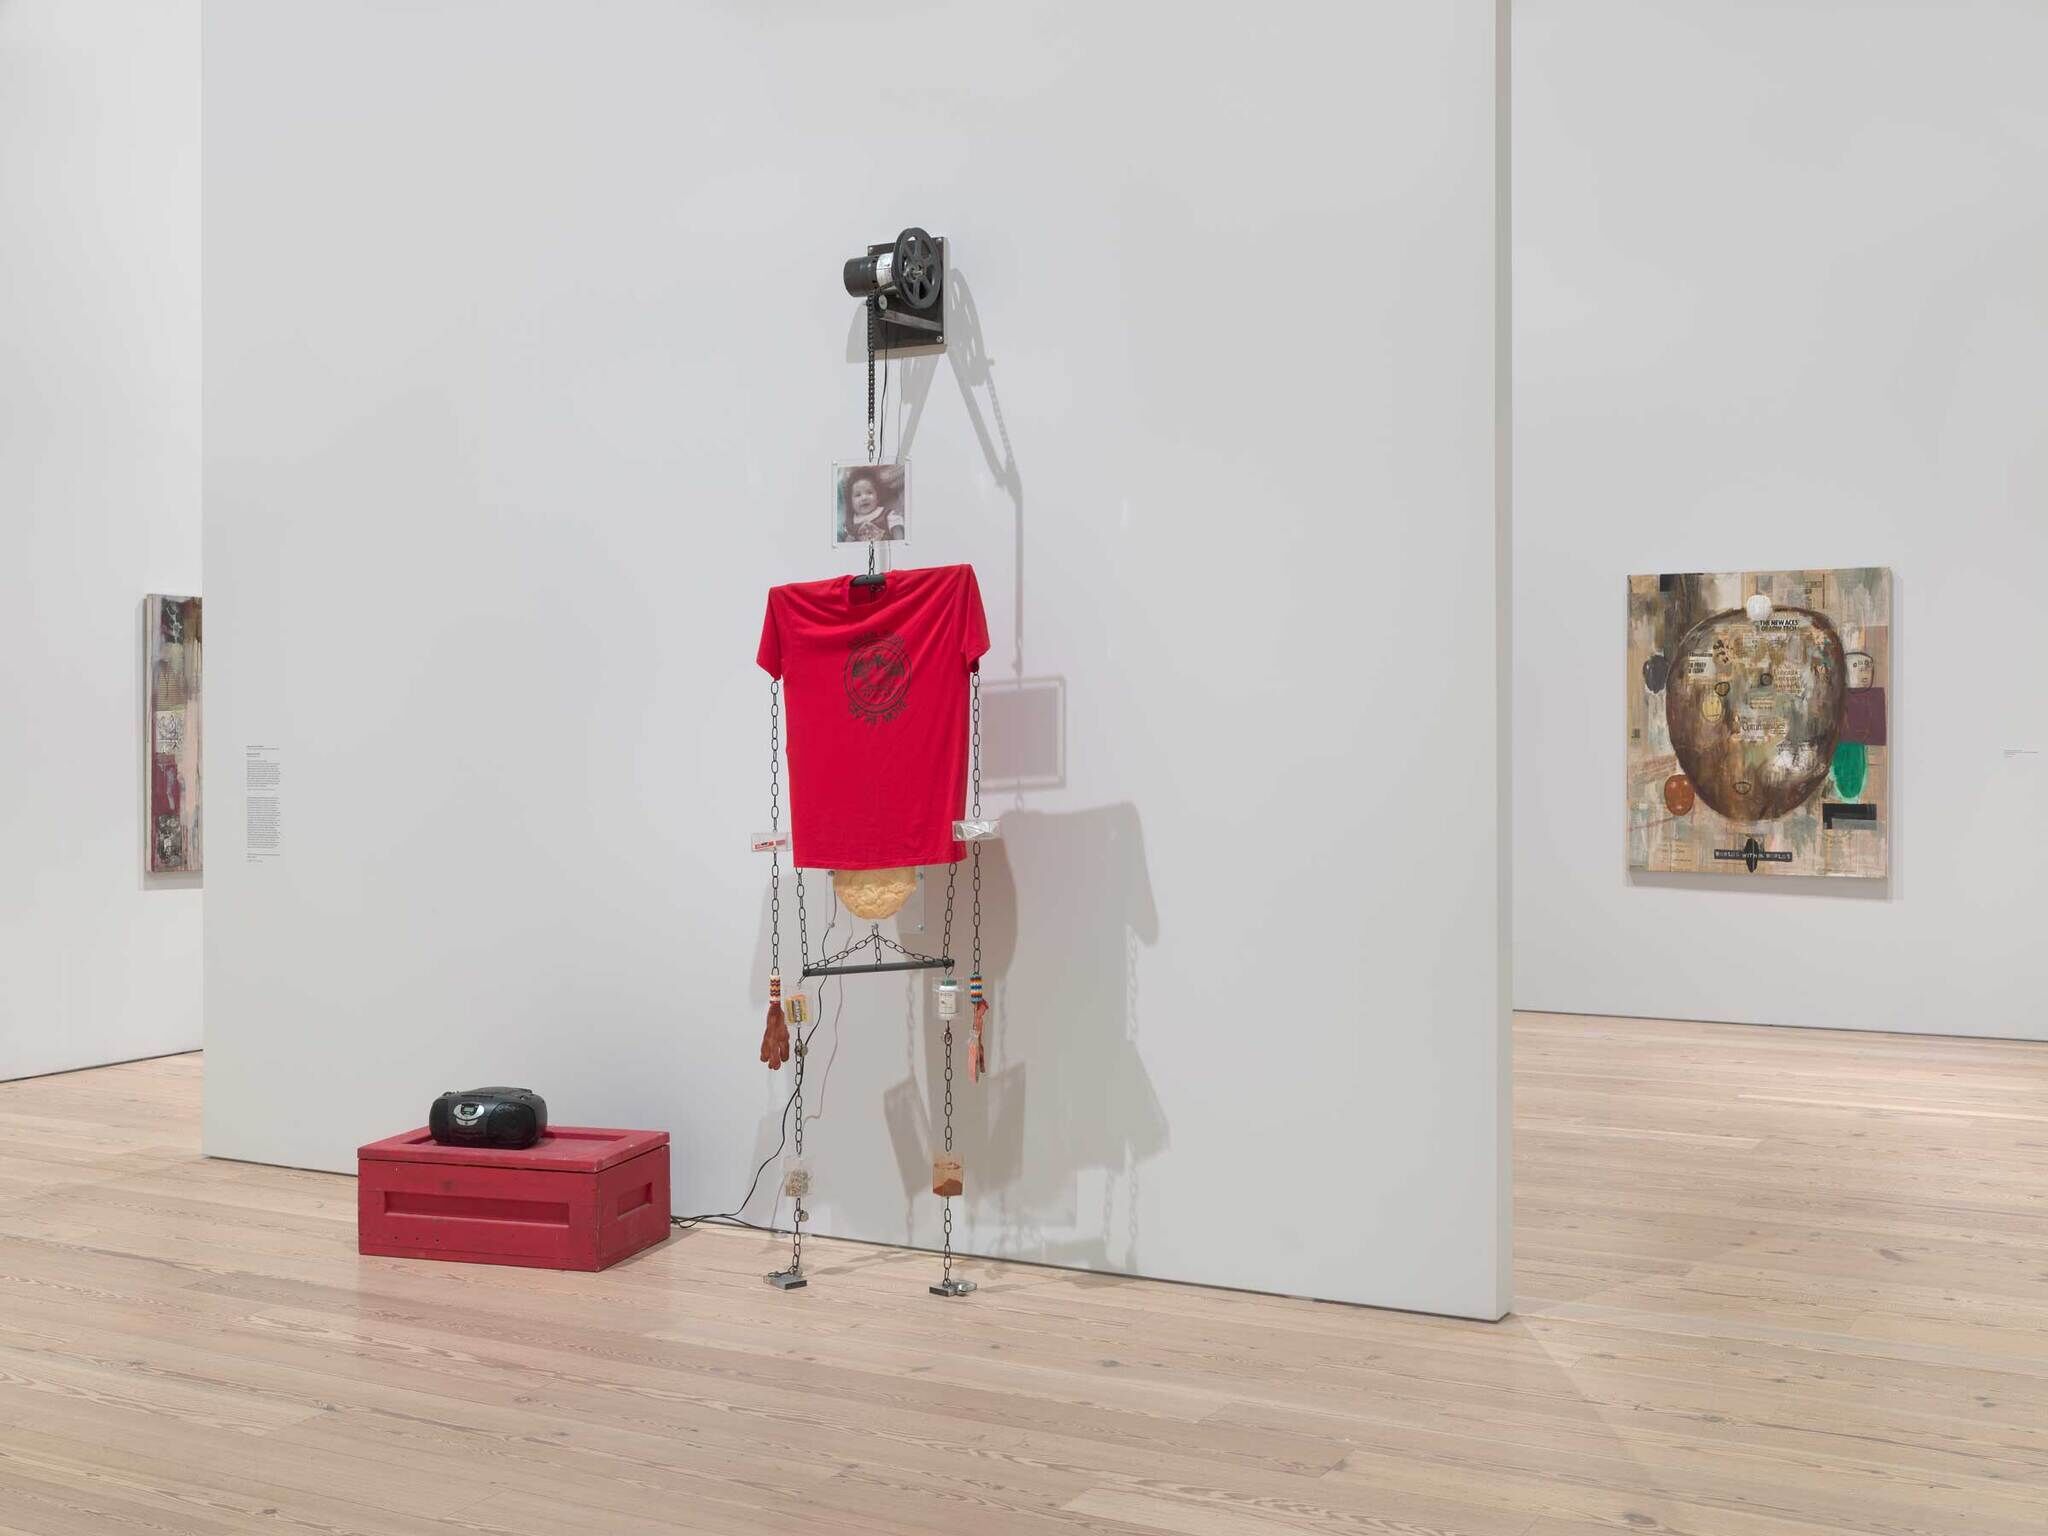 On the left there is a stereo on top of a red cargo box, on the right is a wire sculpture human figure with a red t shirt and a baby photograph as the head.